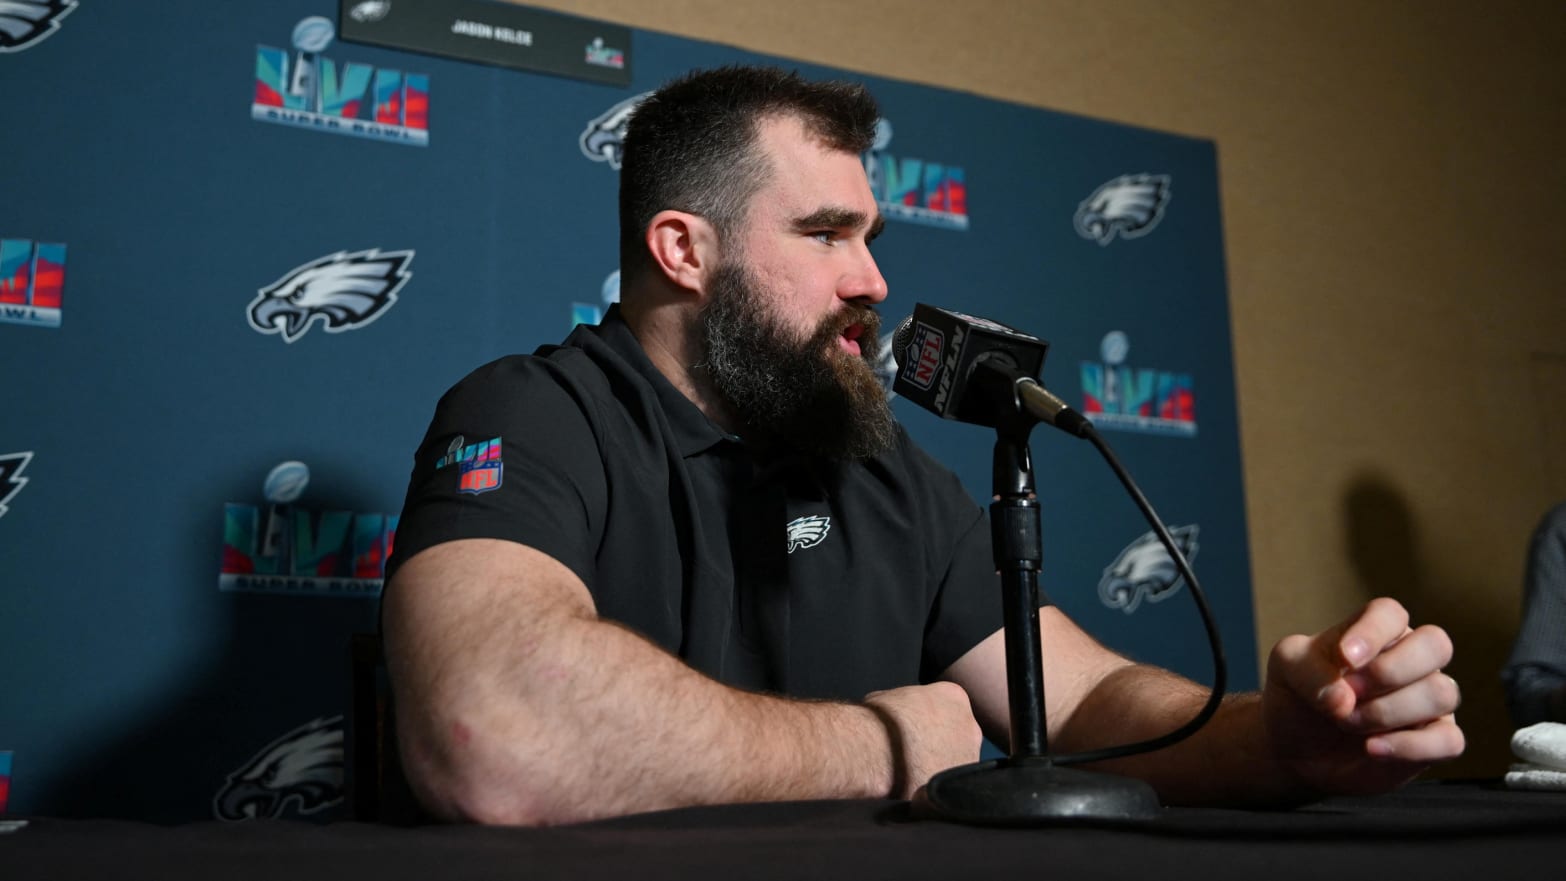 Speculation Abounds as Jason Kelce Considers Retirement U-Turn.